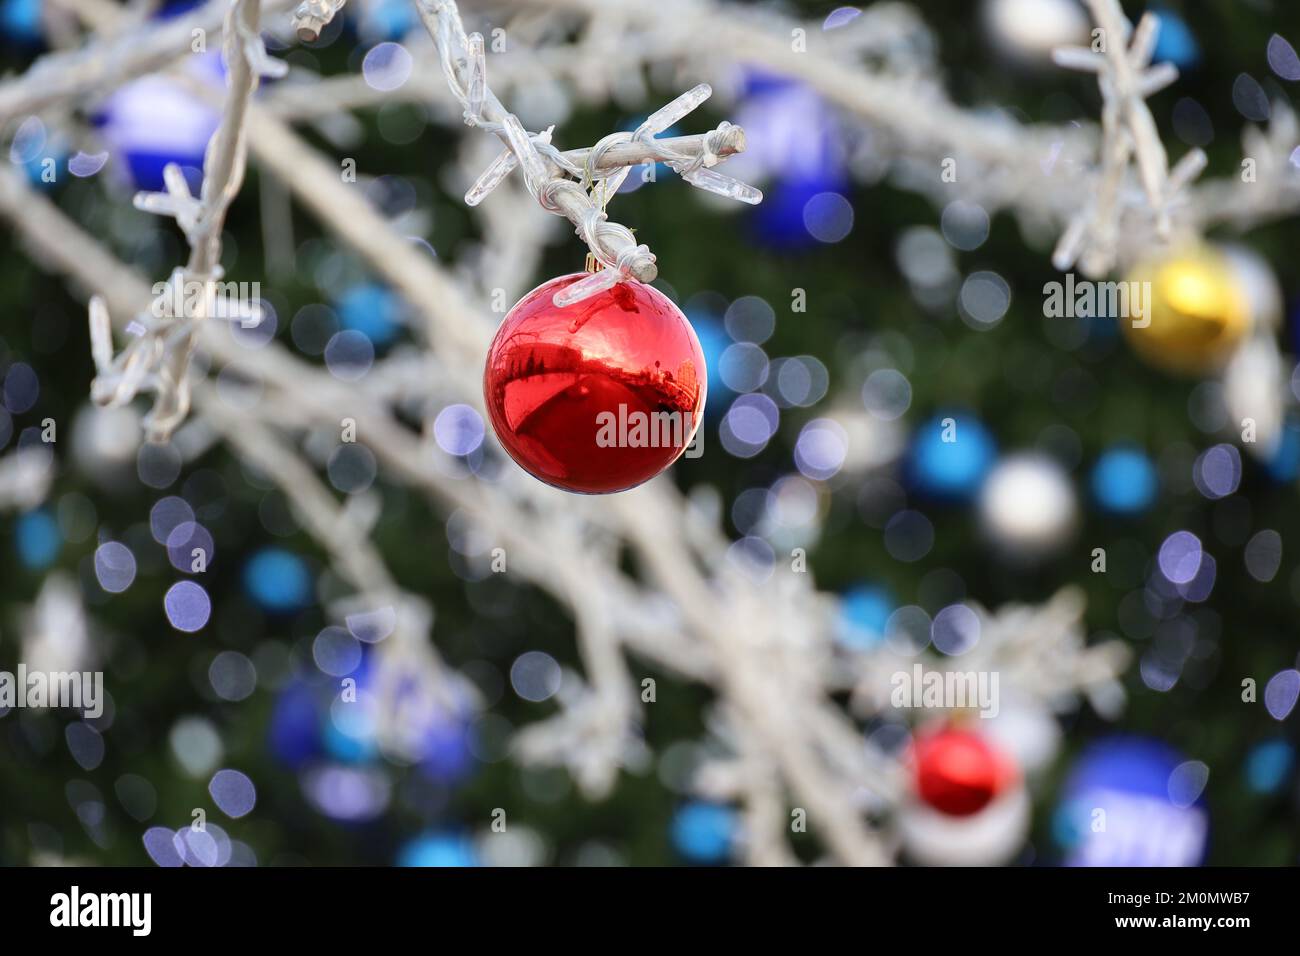 Red ball hanging on Christmas tree background. New Year decorations on winter street Stock Photo